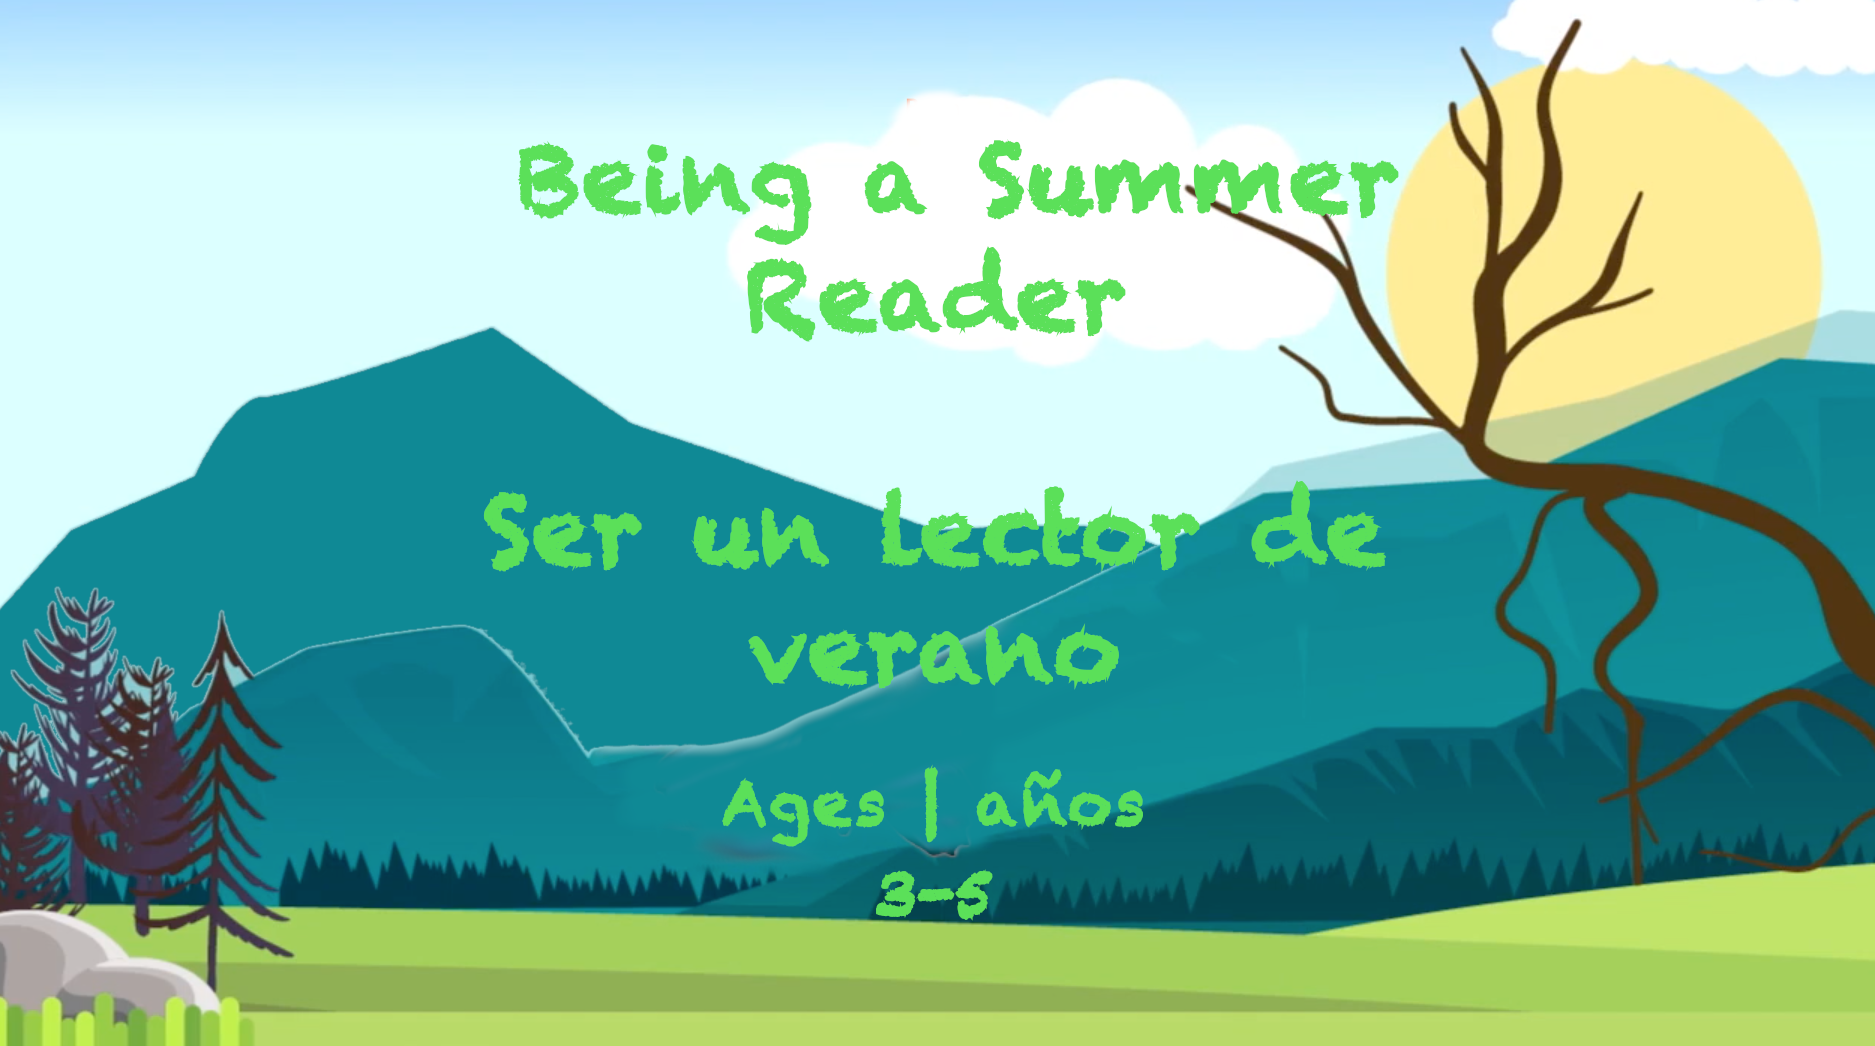 Being a Summer Reader for 3-5 year olds